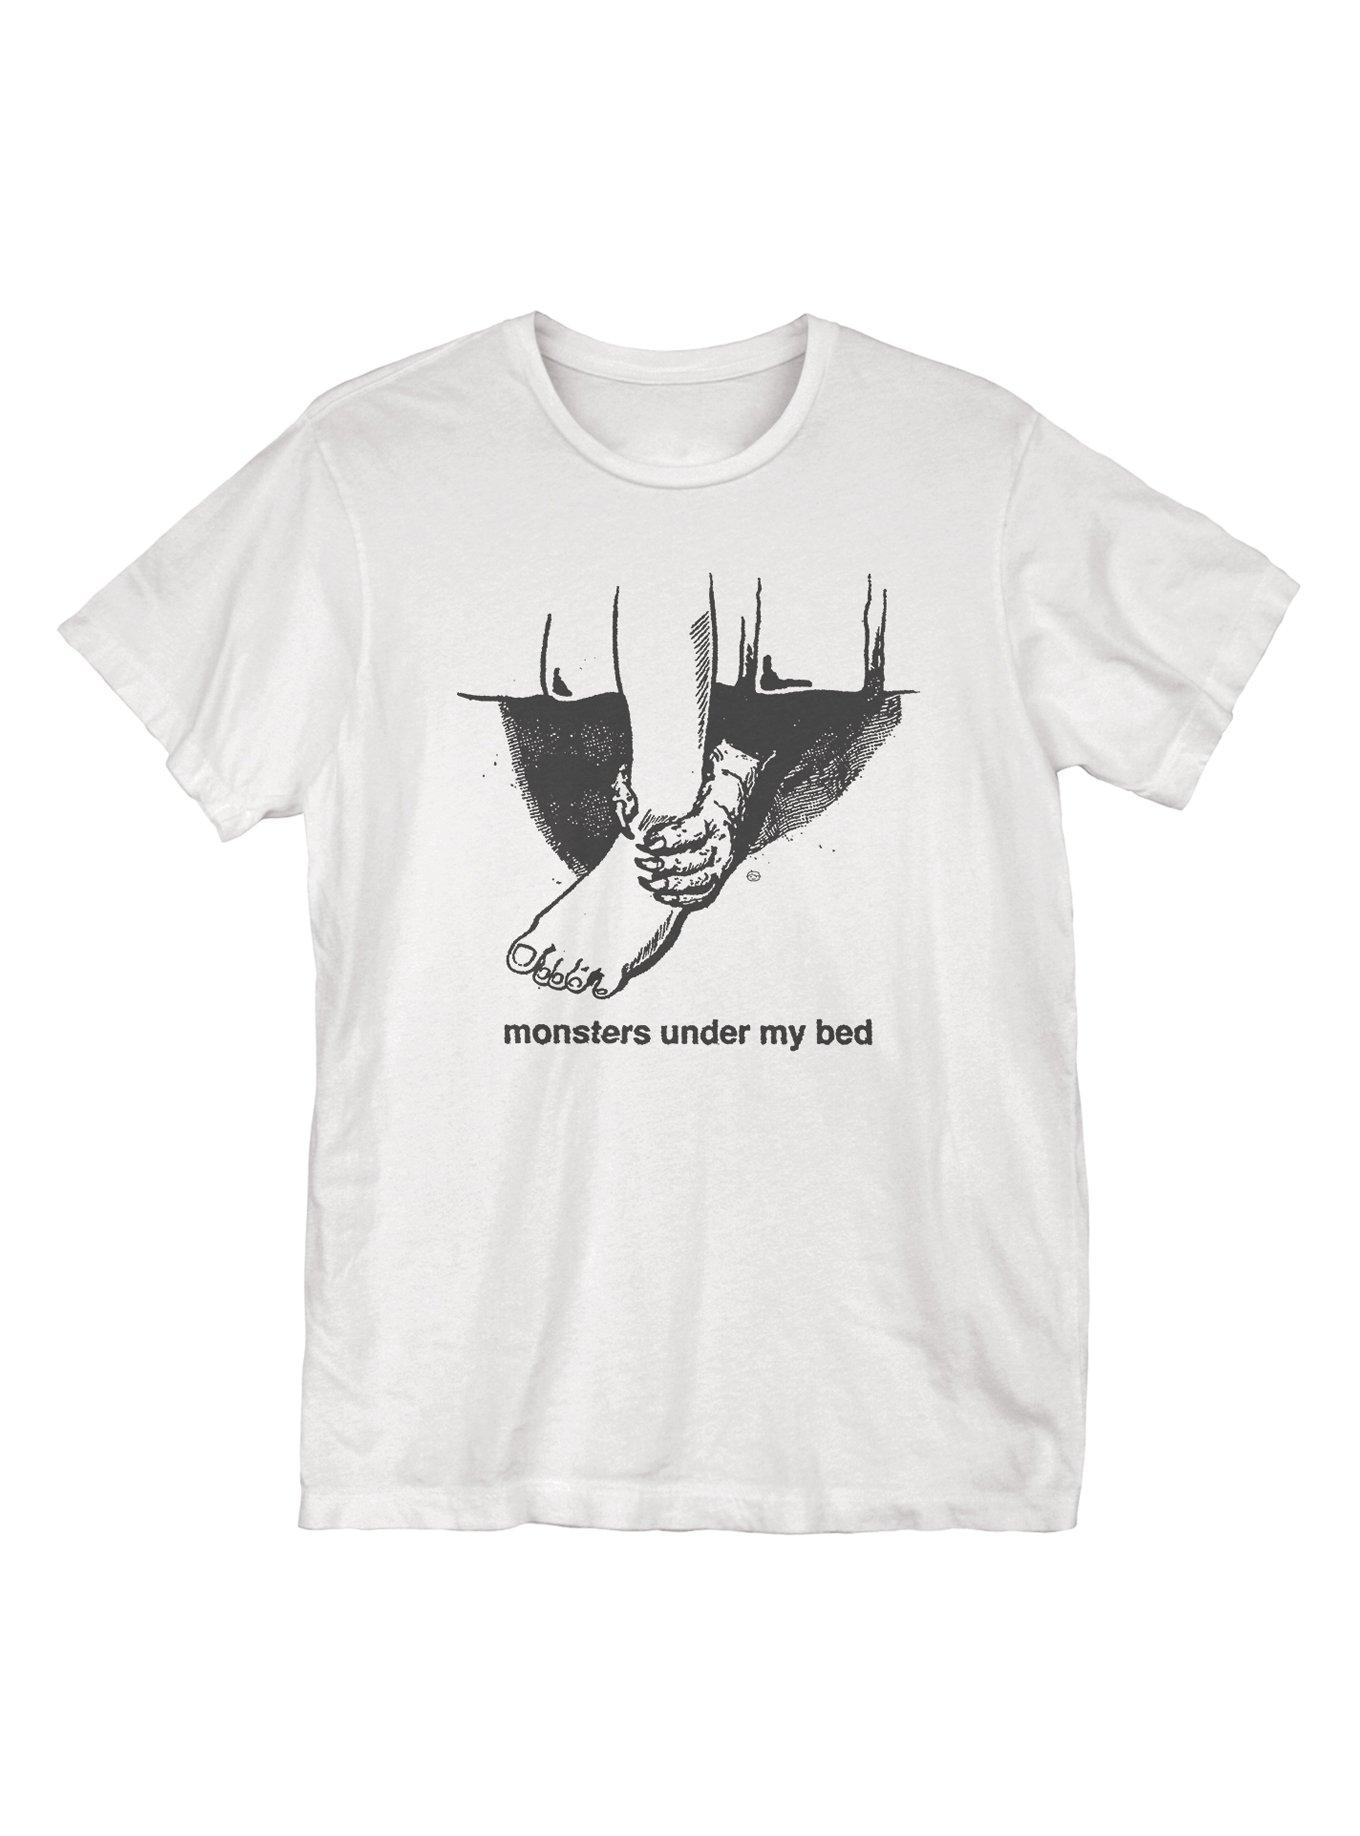 Monsters Under My Bed T-Shirt, WHITE, hi-res